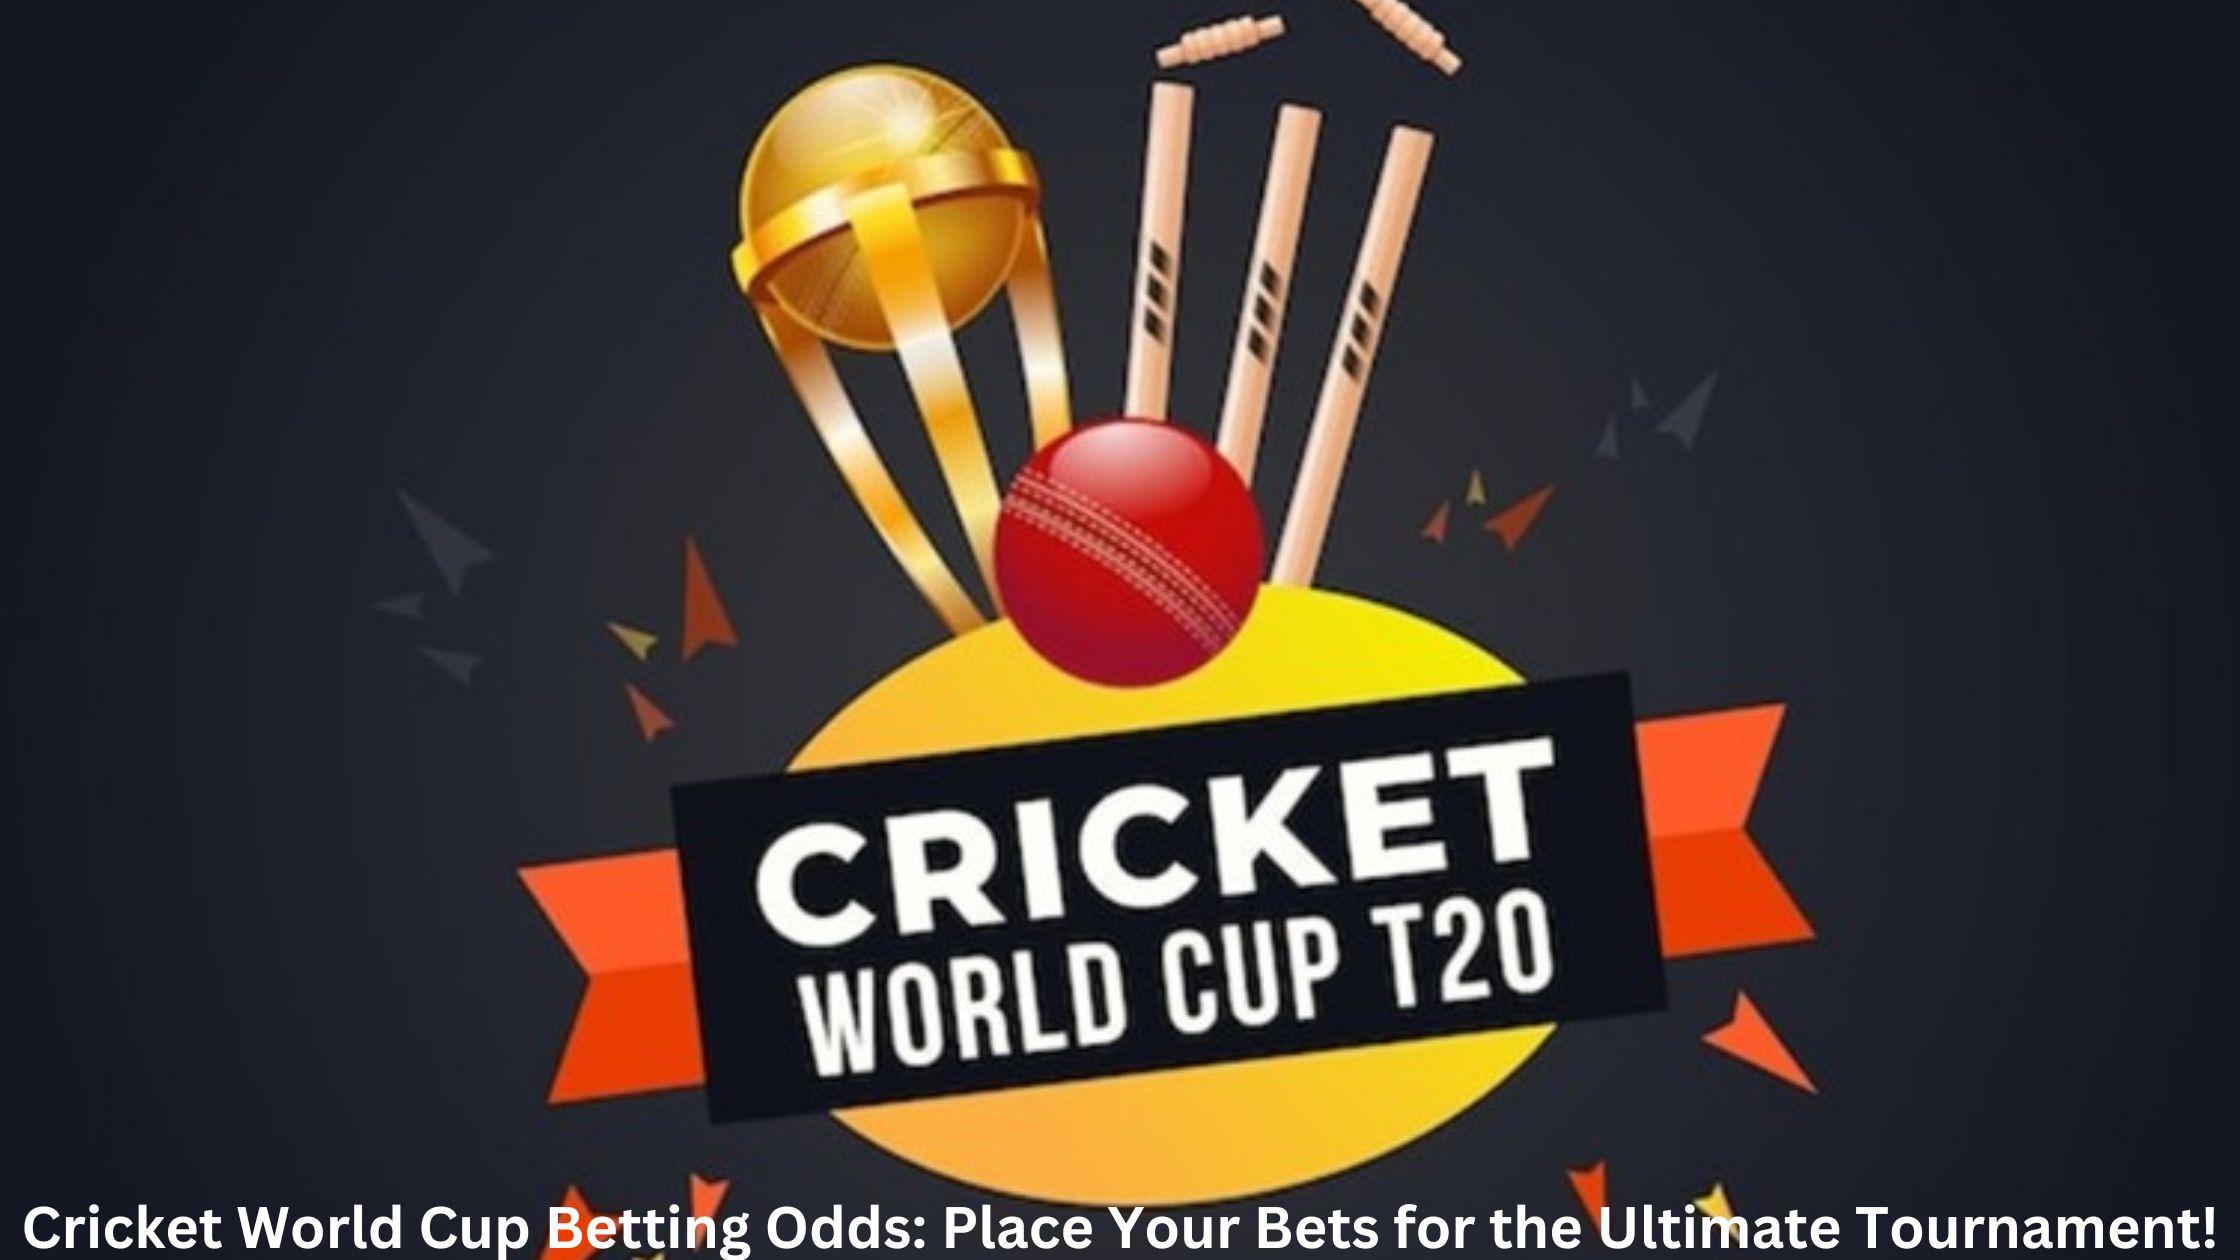 Cricket World Cup Betting Odds: Place Your Bets for Win!